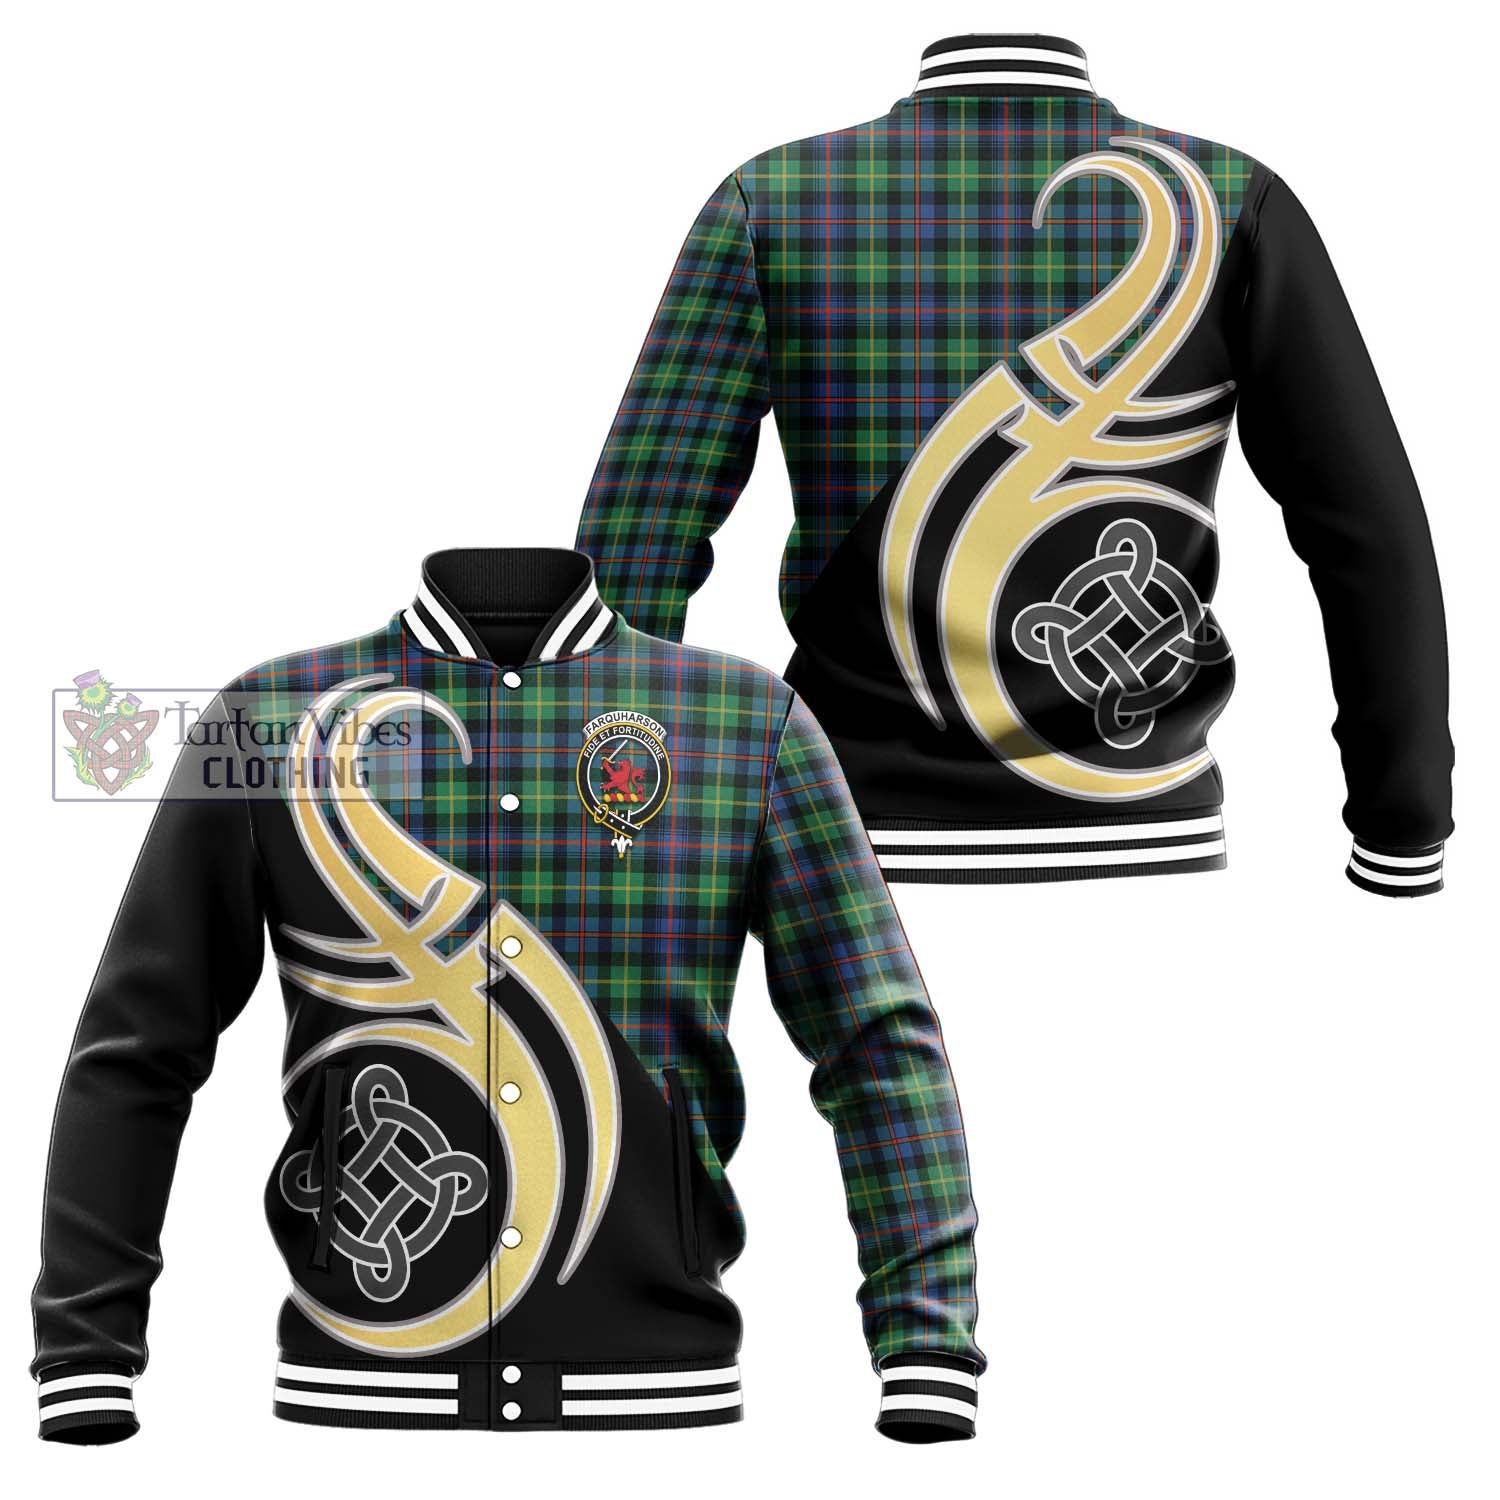 Tartan Vibes Clothing Farquharson Ancient Tartan Baseball Jacket with Family Crest and Celtic Symbol Style